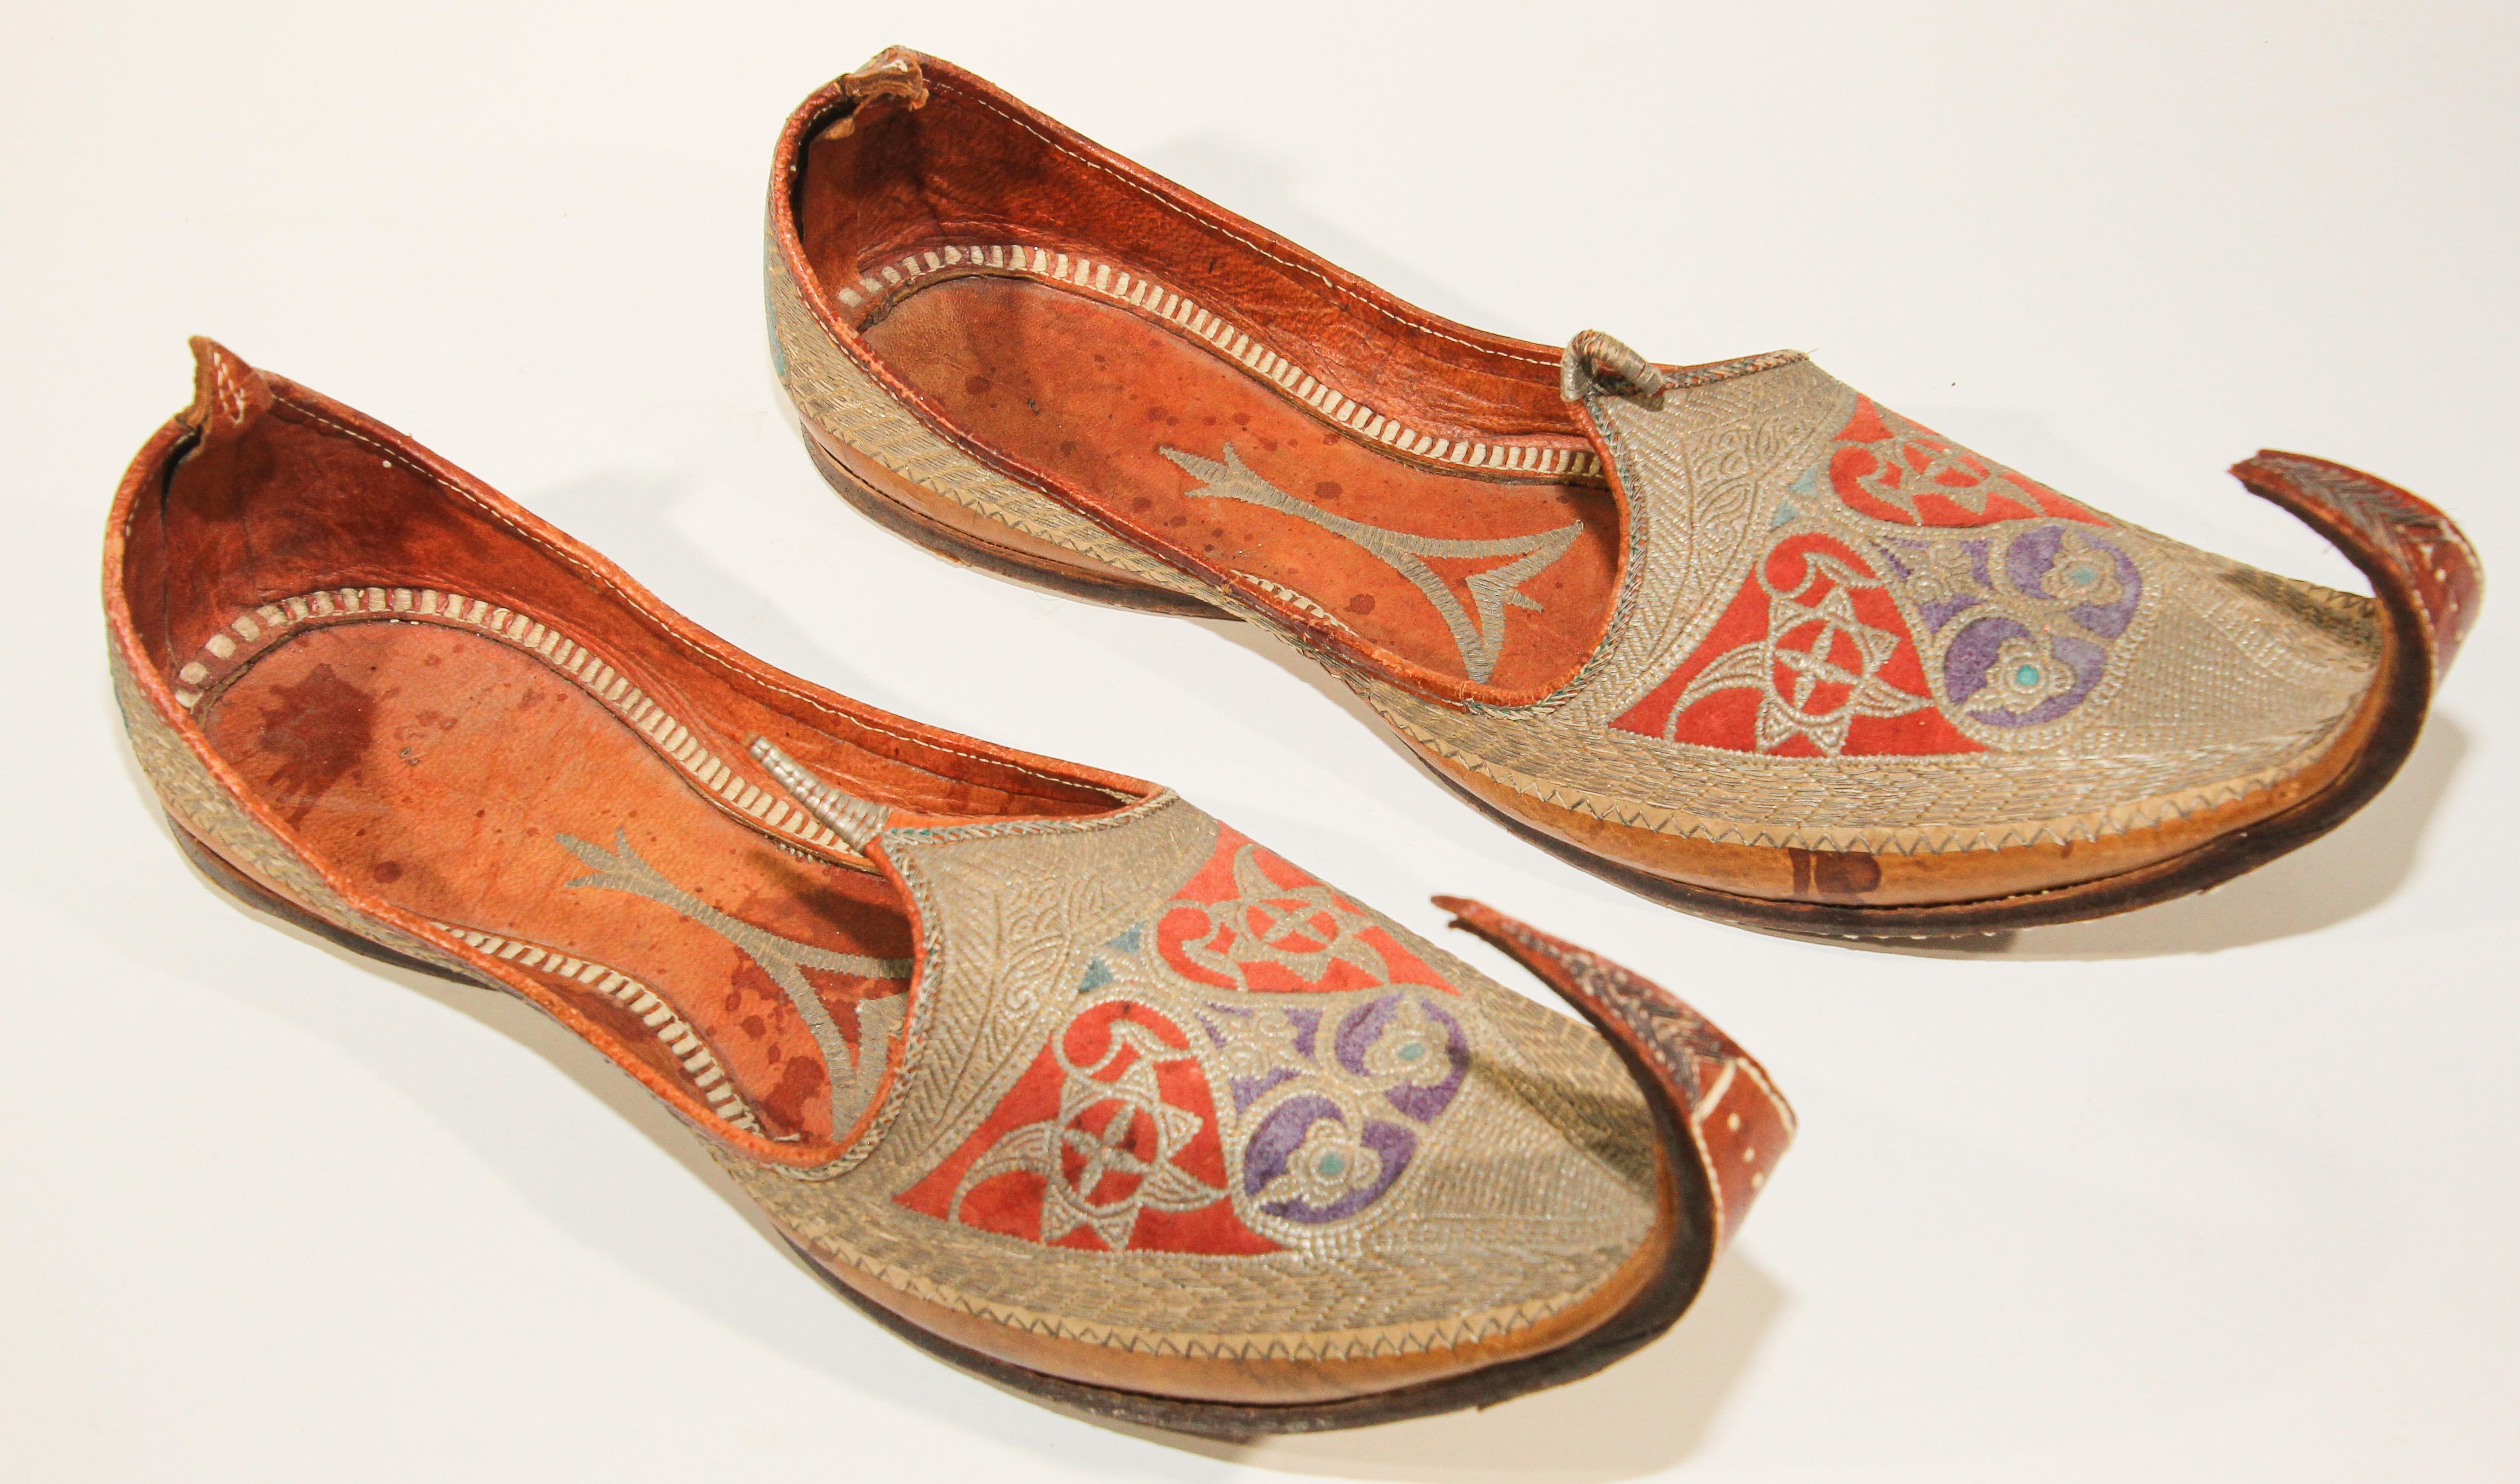 A pair of rare late 19th century hand stitched and hand tooled leather shoes with hand embroidered with gilt metallic threads.
Amazing antique Mughal gold embroidered traditional Islamic Indian leather shoes fit for a Maharaja. 
Arabic Persian